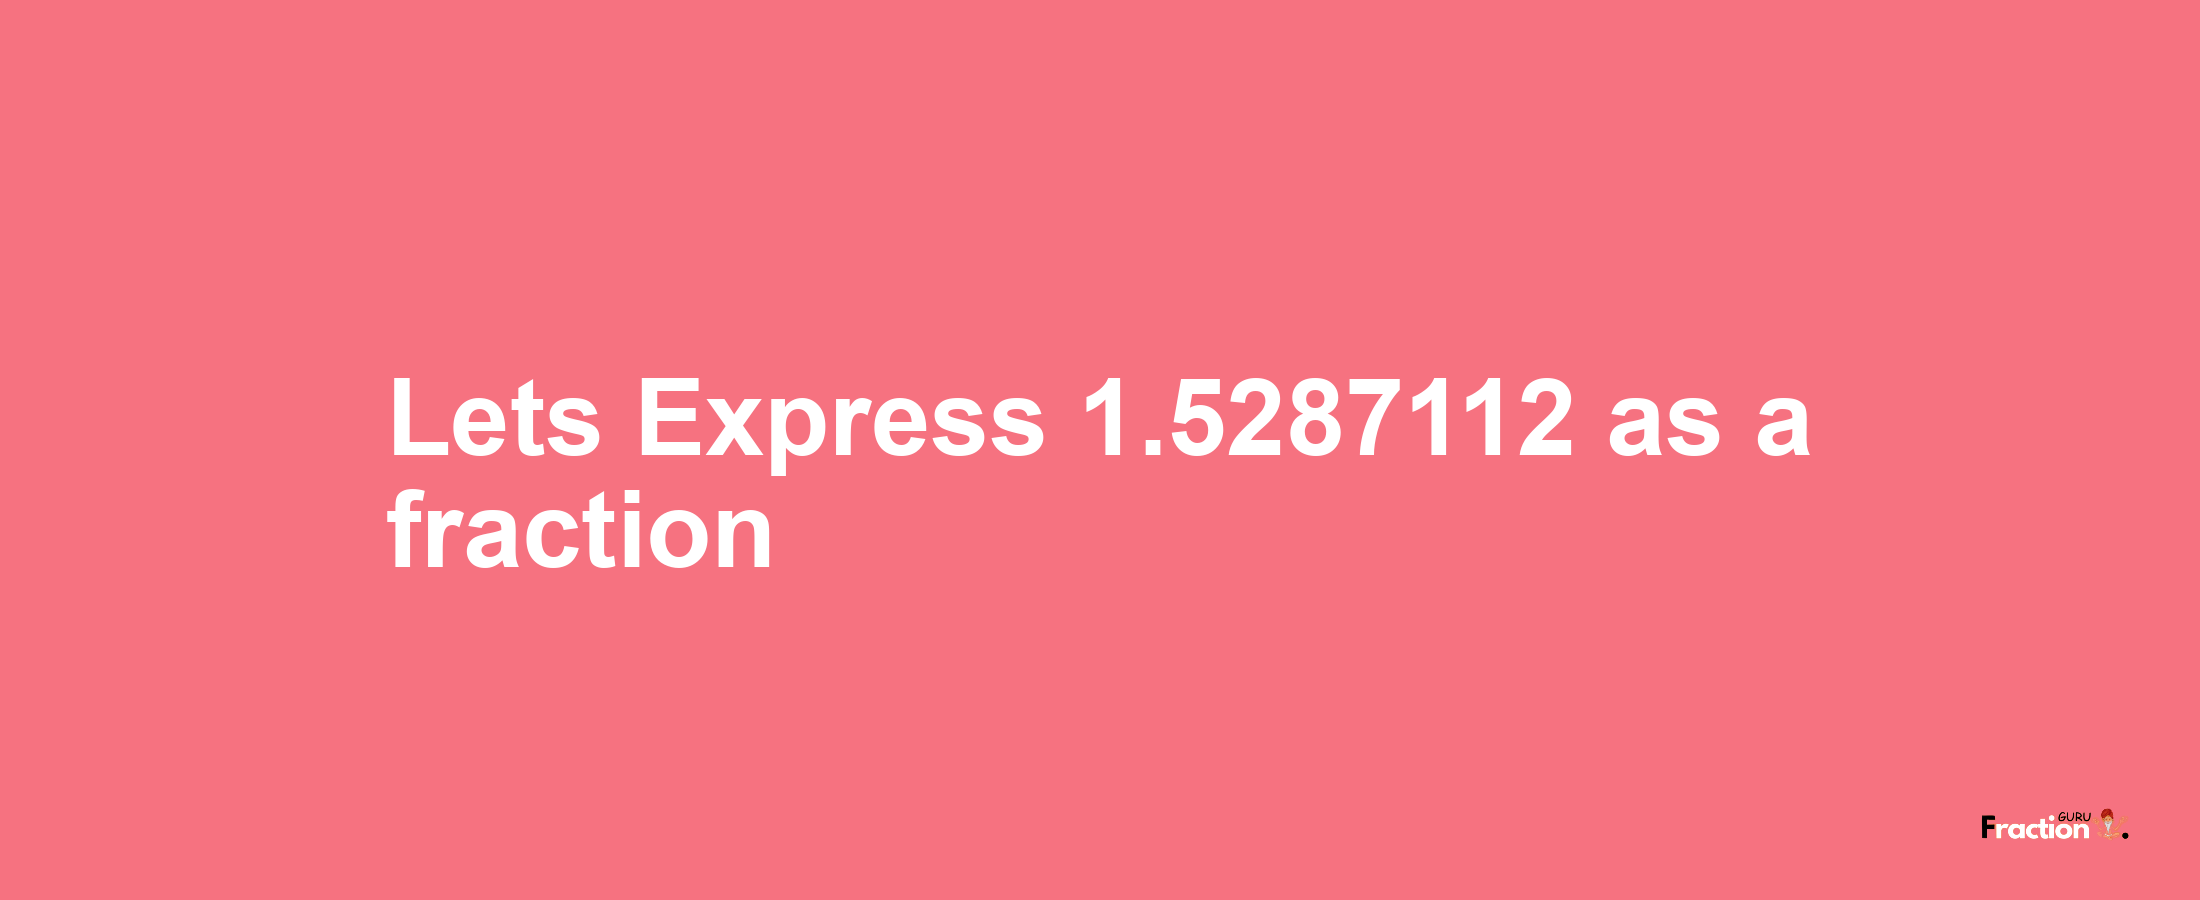 Lets Express 1.5287112 as afraction